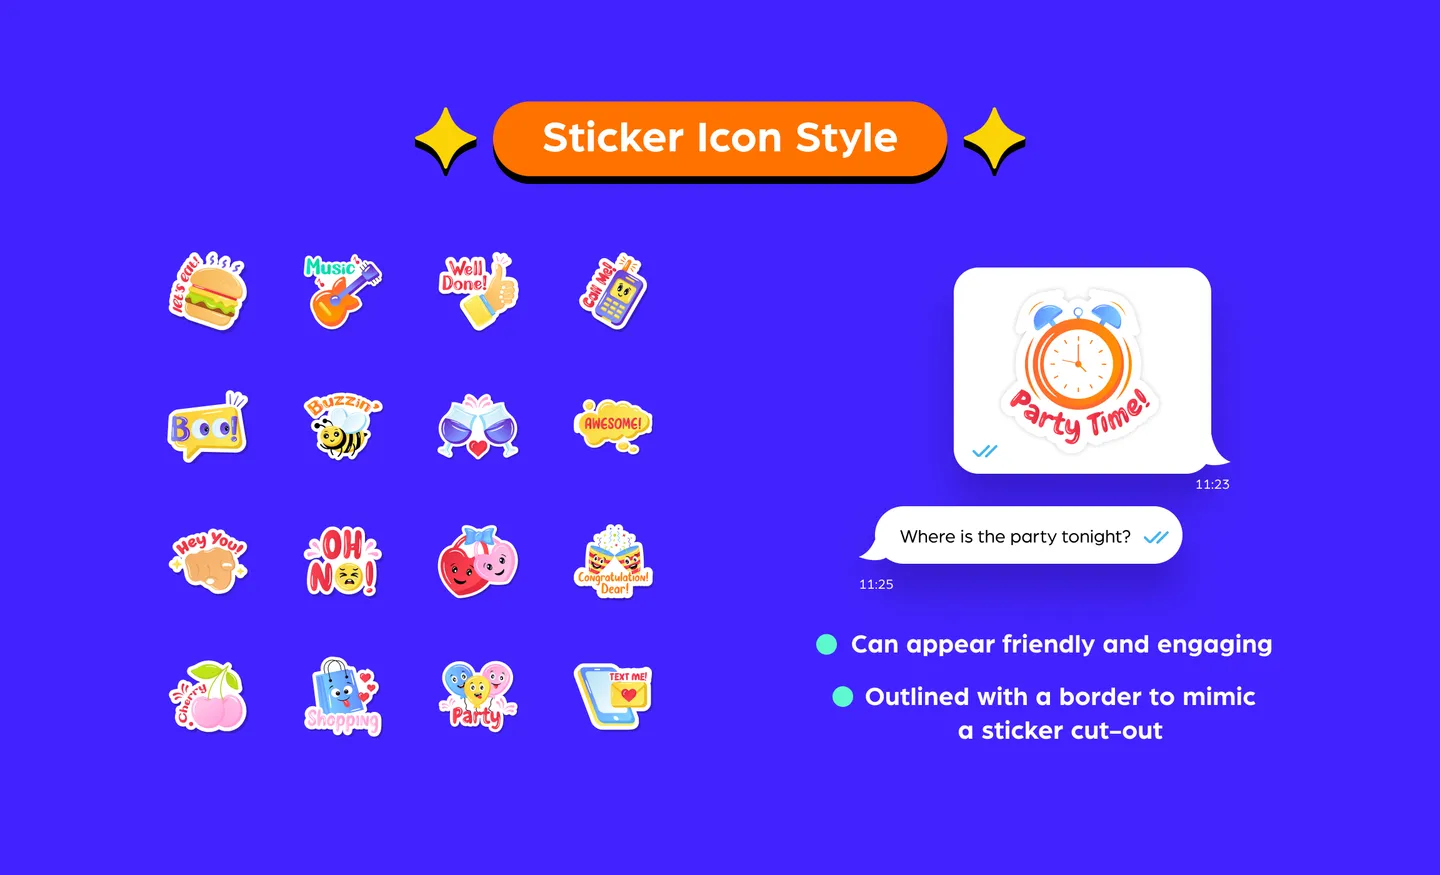 A guide to the sticker icon style